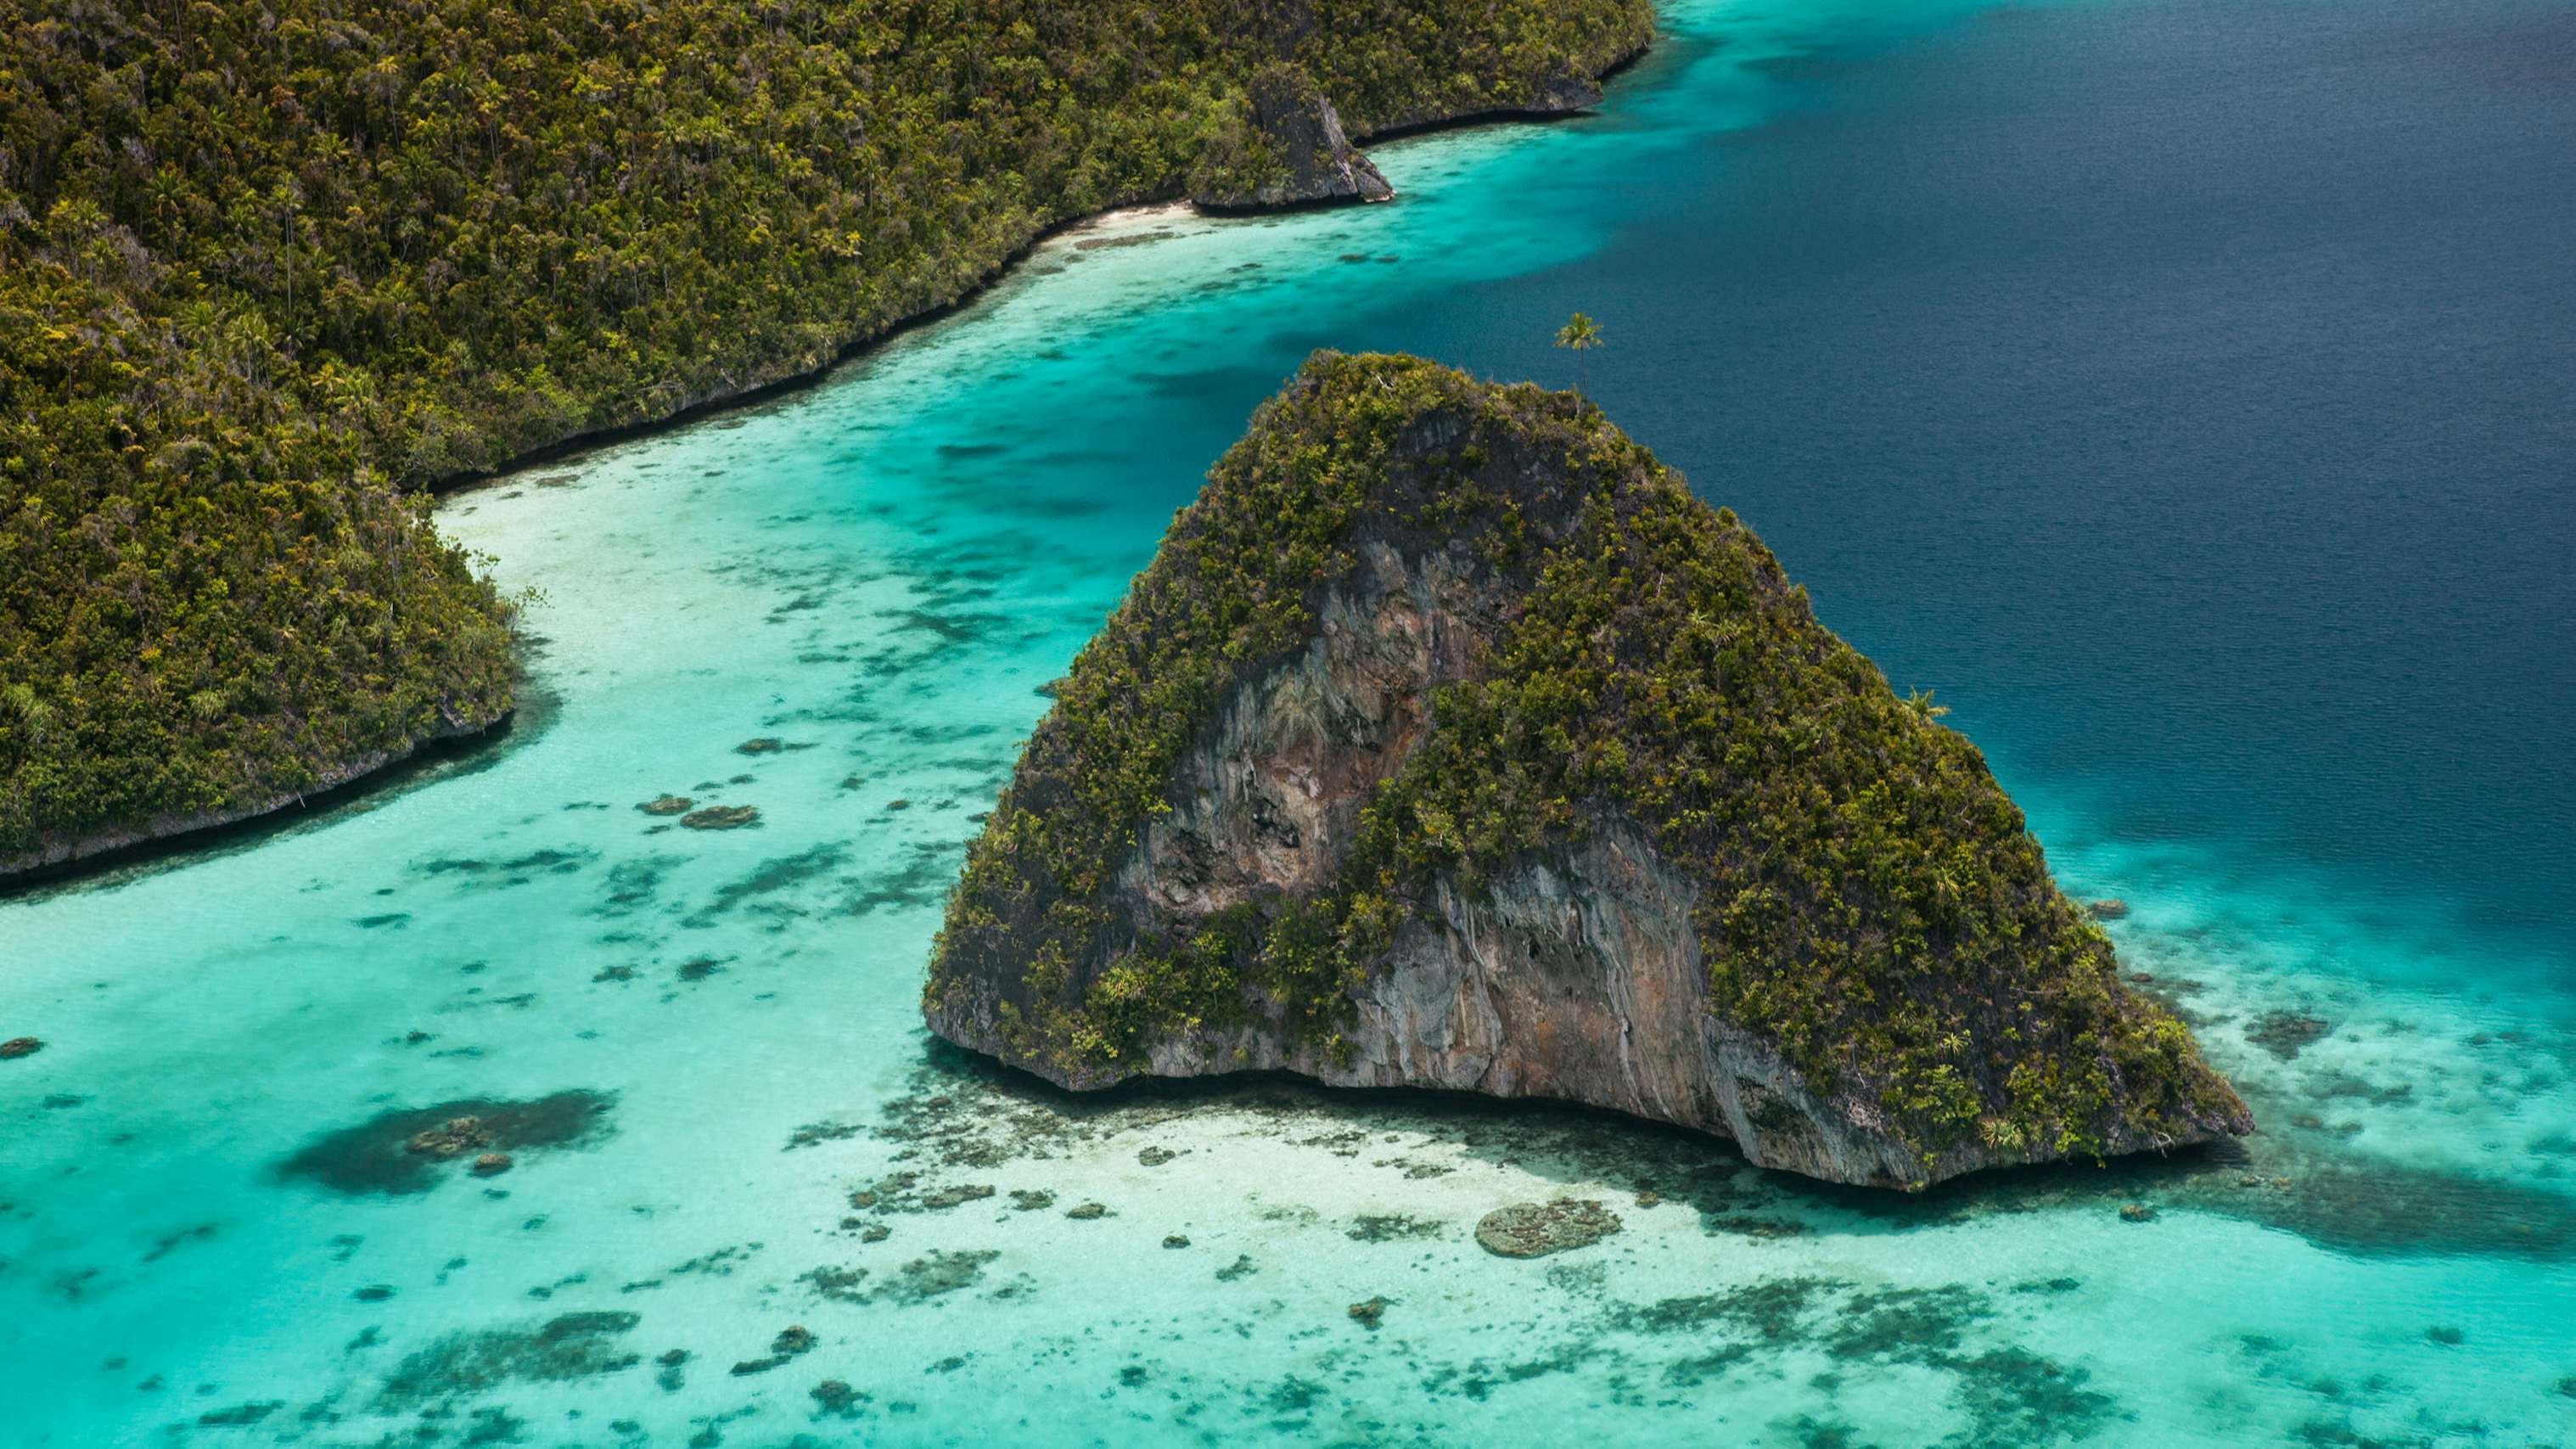 Indonesia Yacht Charter - Limestone islands rise from a gorgeous lagoon in Wayag, Raja Ampat, Indonesia. This remote, tropical region is known as the heart of the Coral Triangle due to its incredible marine biodiversity.